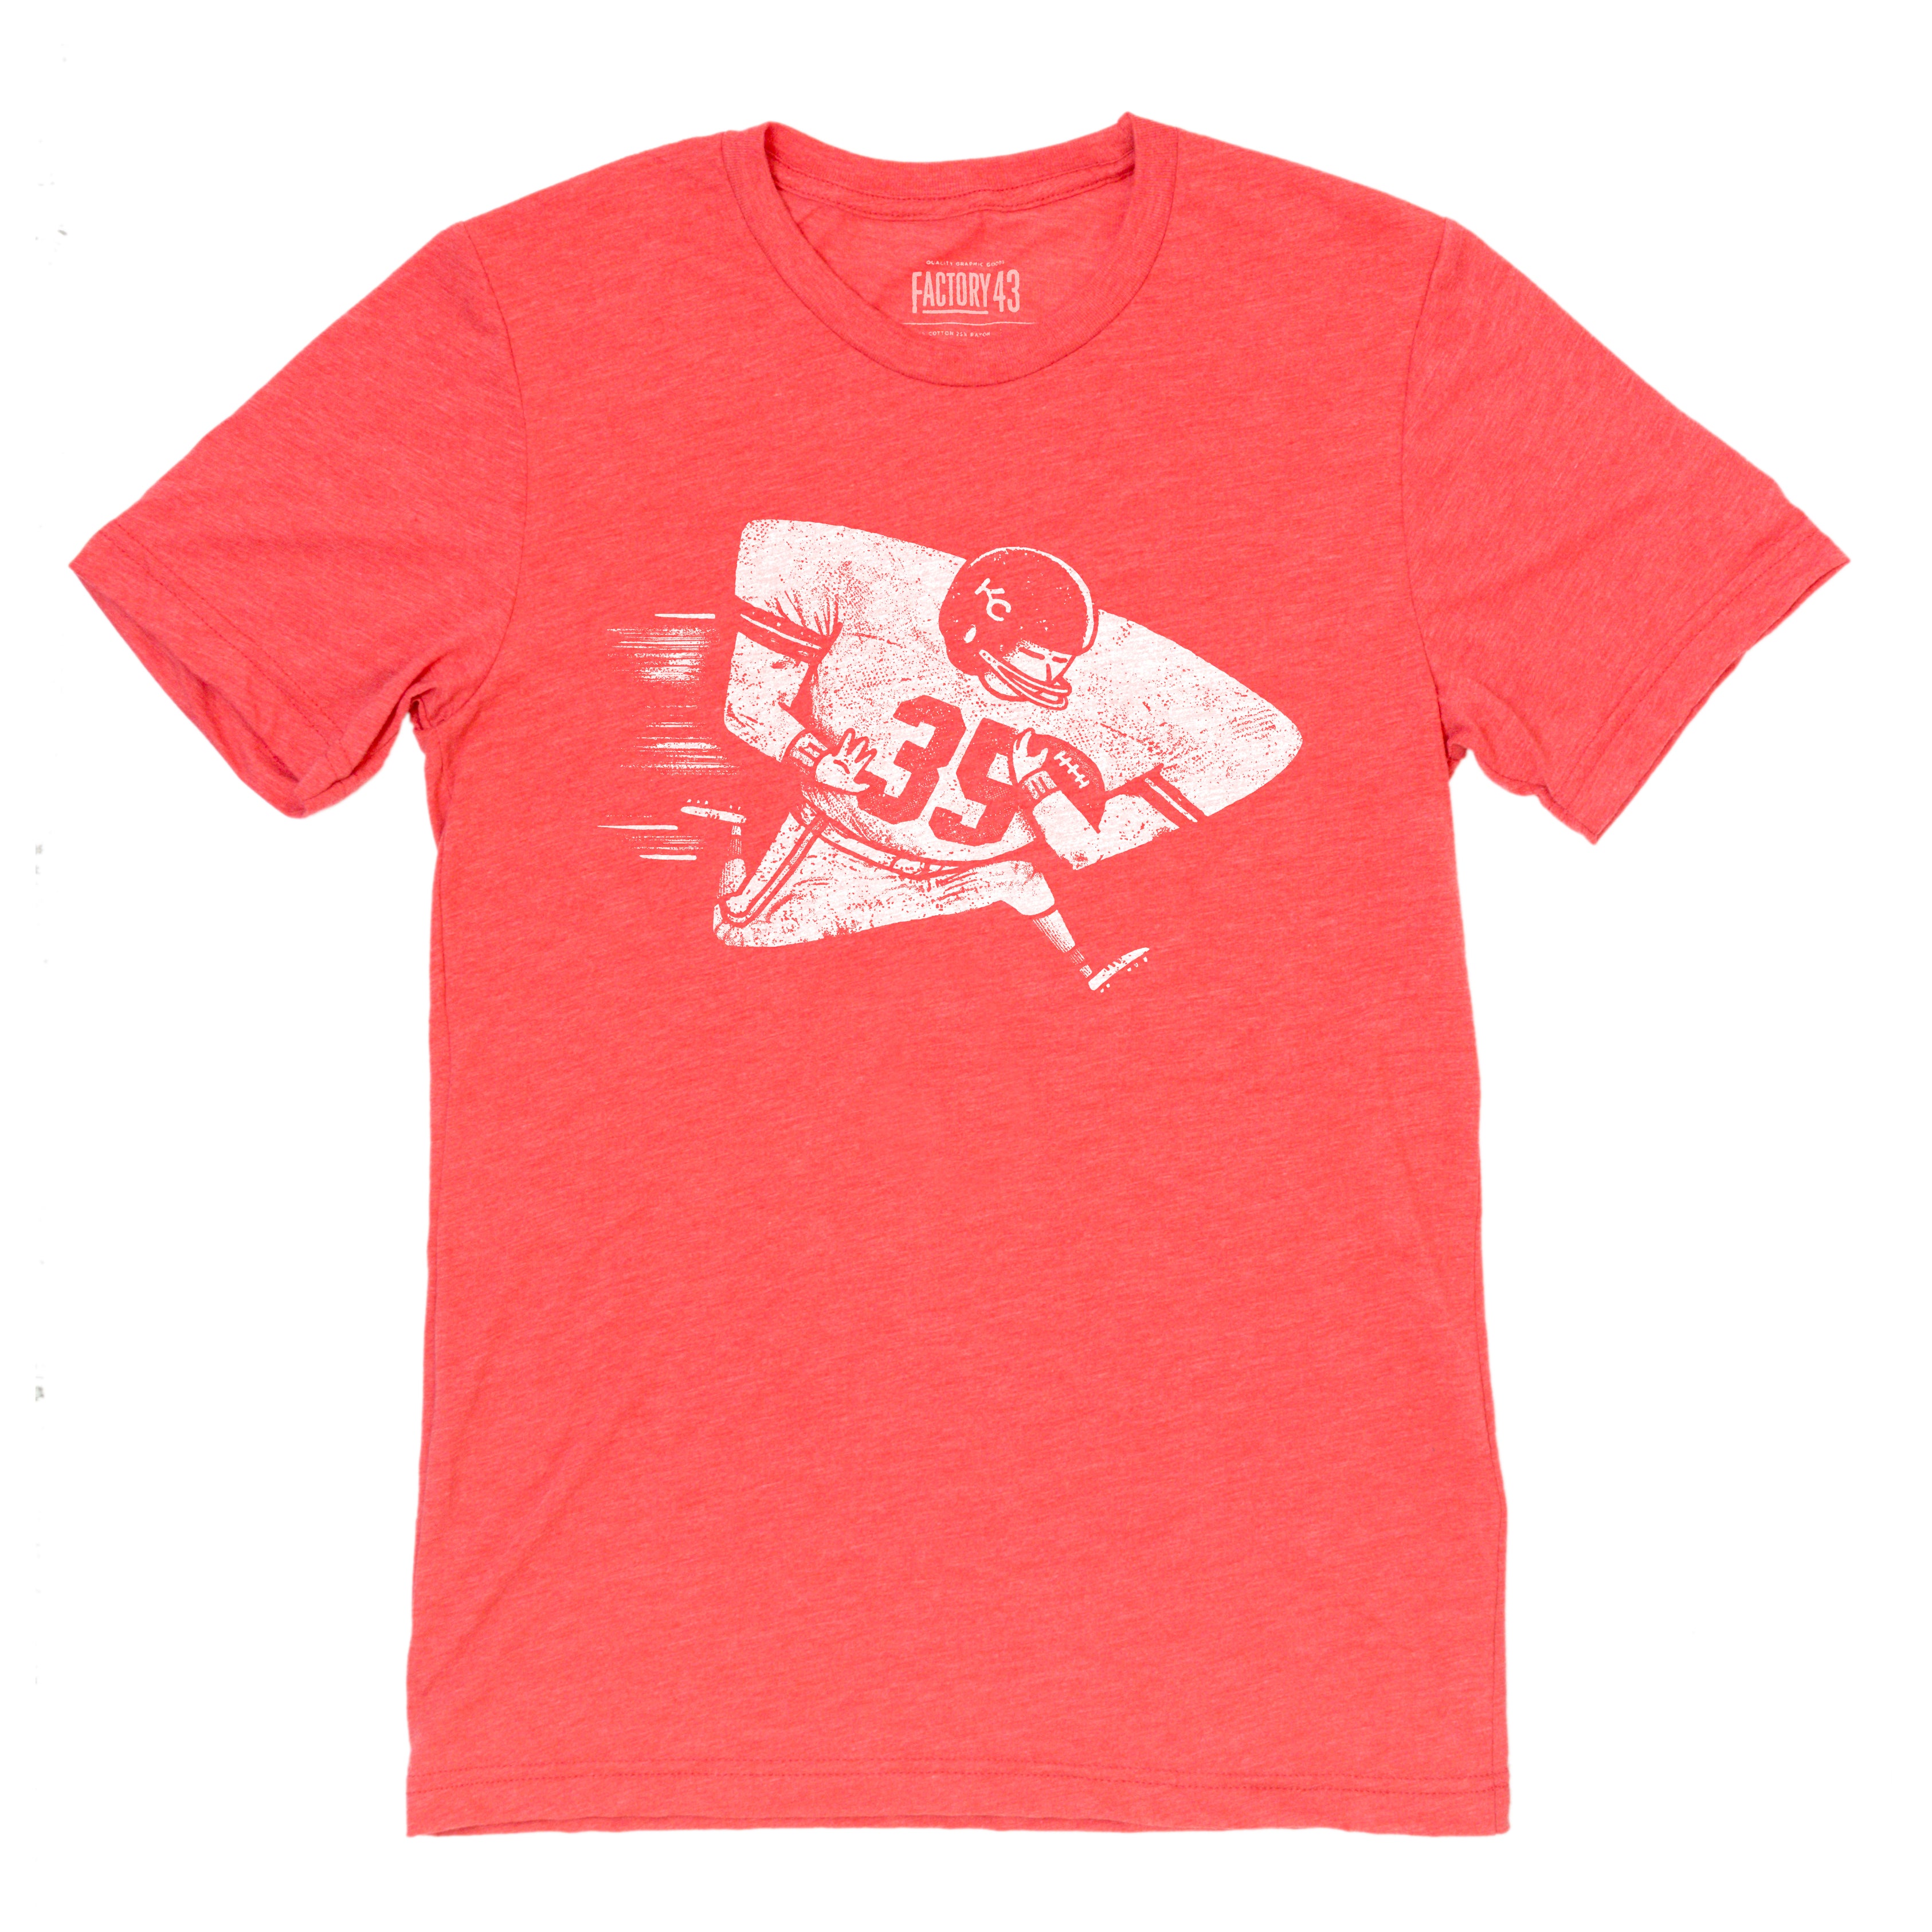 Super soft red mens/womens tee of an arrowhead shaped football player running. Factory 43 is a graphic design studio that makes art with a PNW vibe that reflects their Midwest/Southern roots. This cotton/polyester/rayon was printed in Seattle, Washington. 